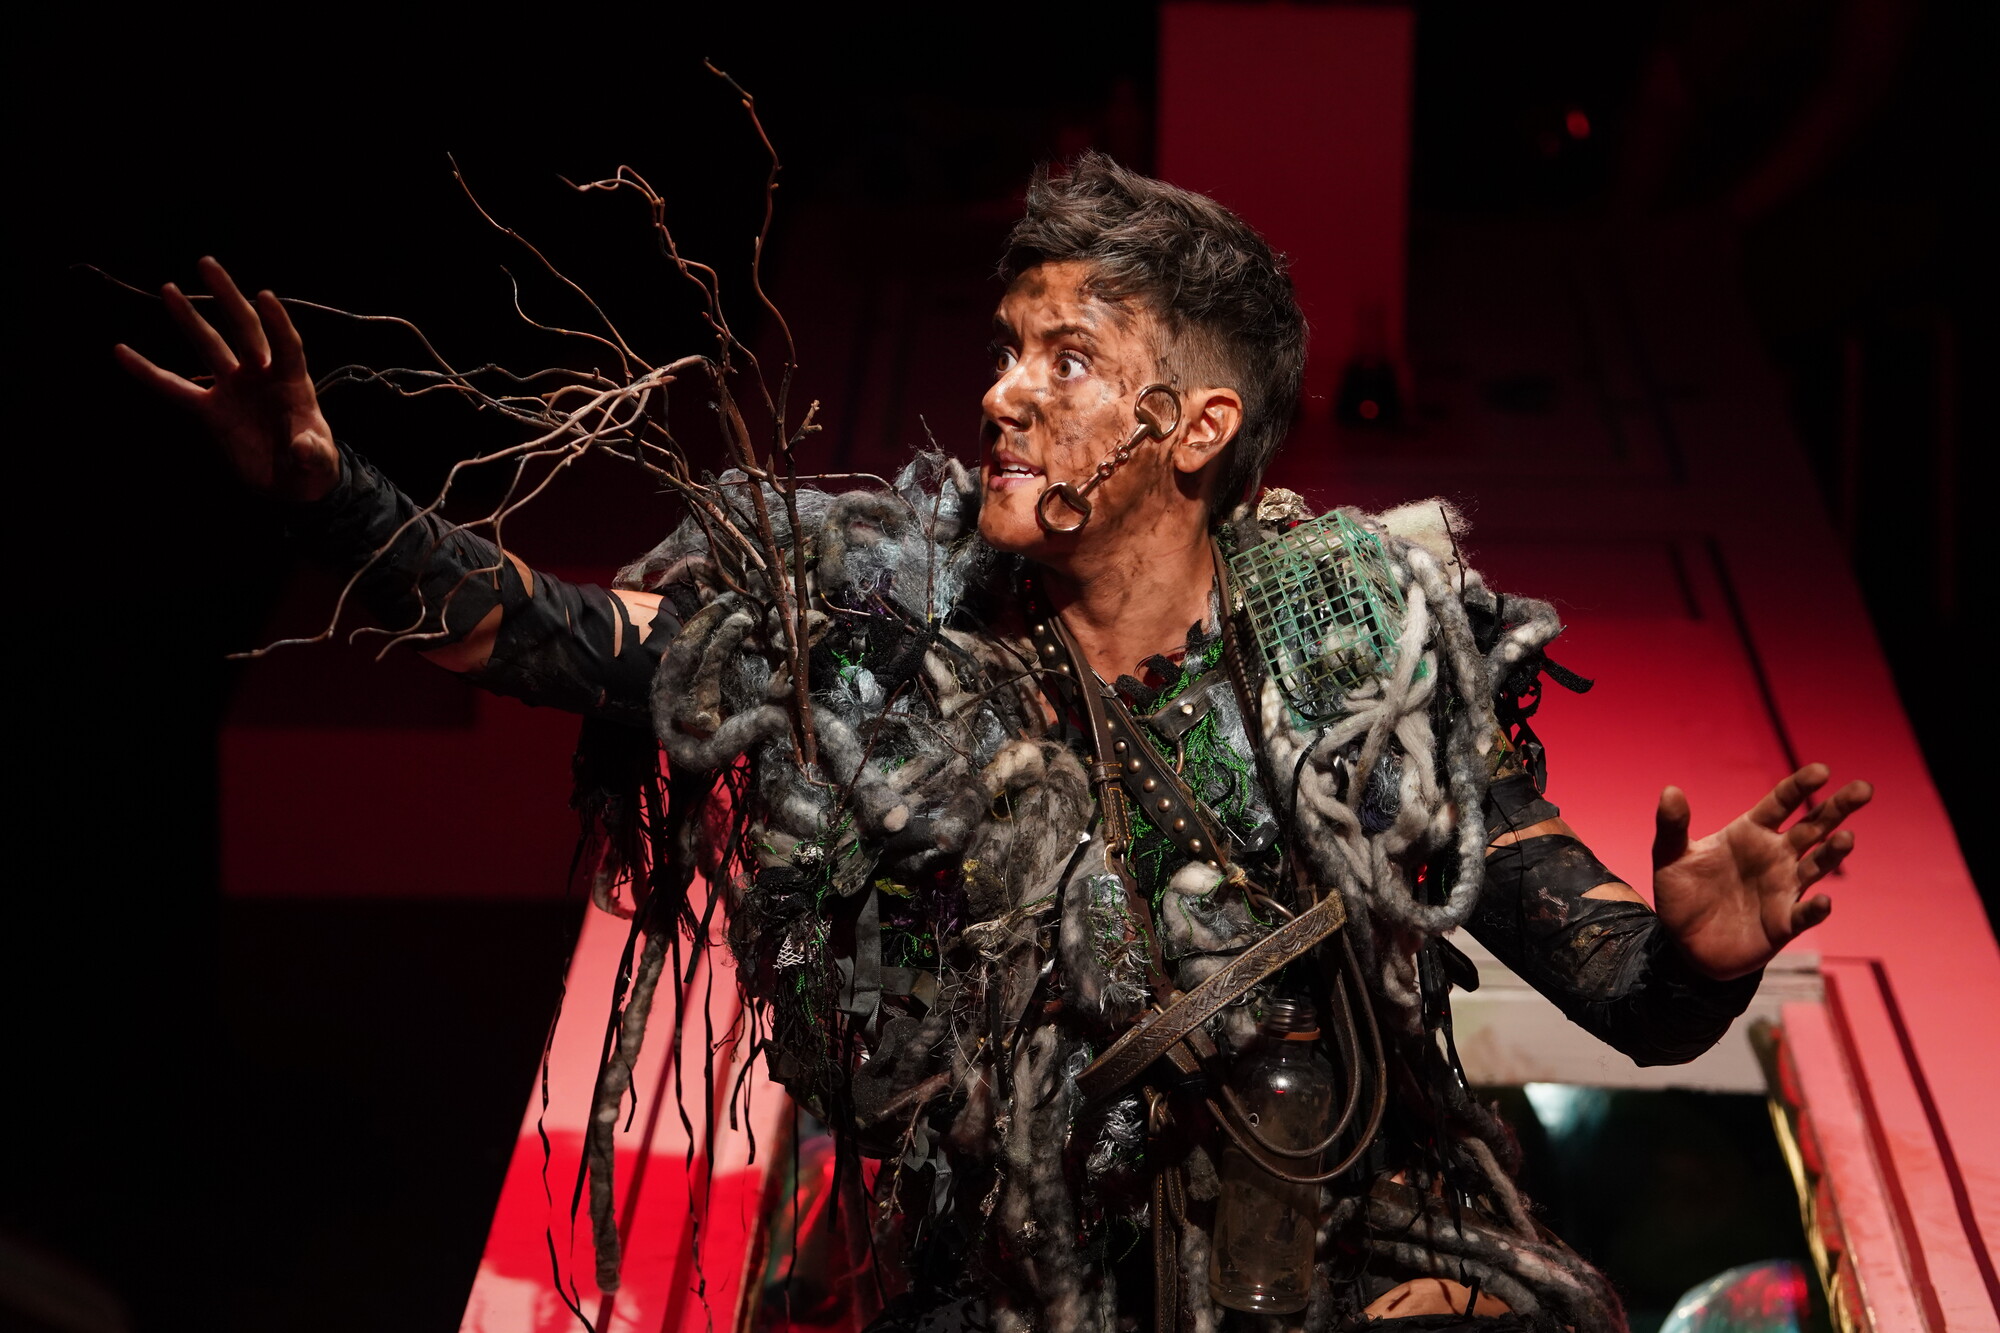 A performer in a costume resembling a combination of trash and natural debris reaches out to the audience with a fierce expression.